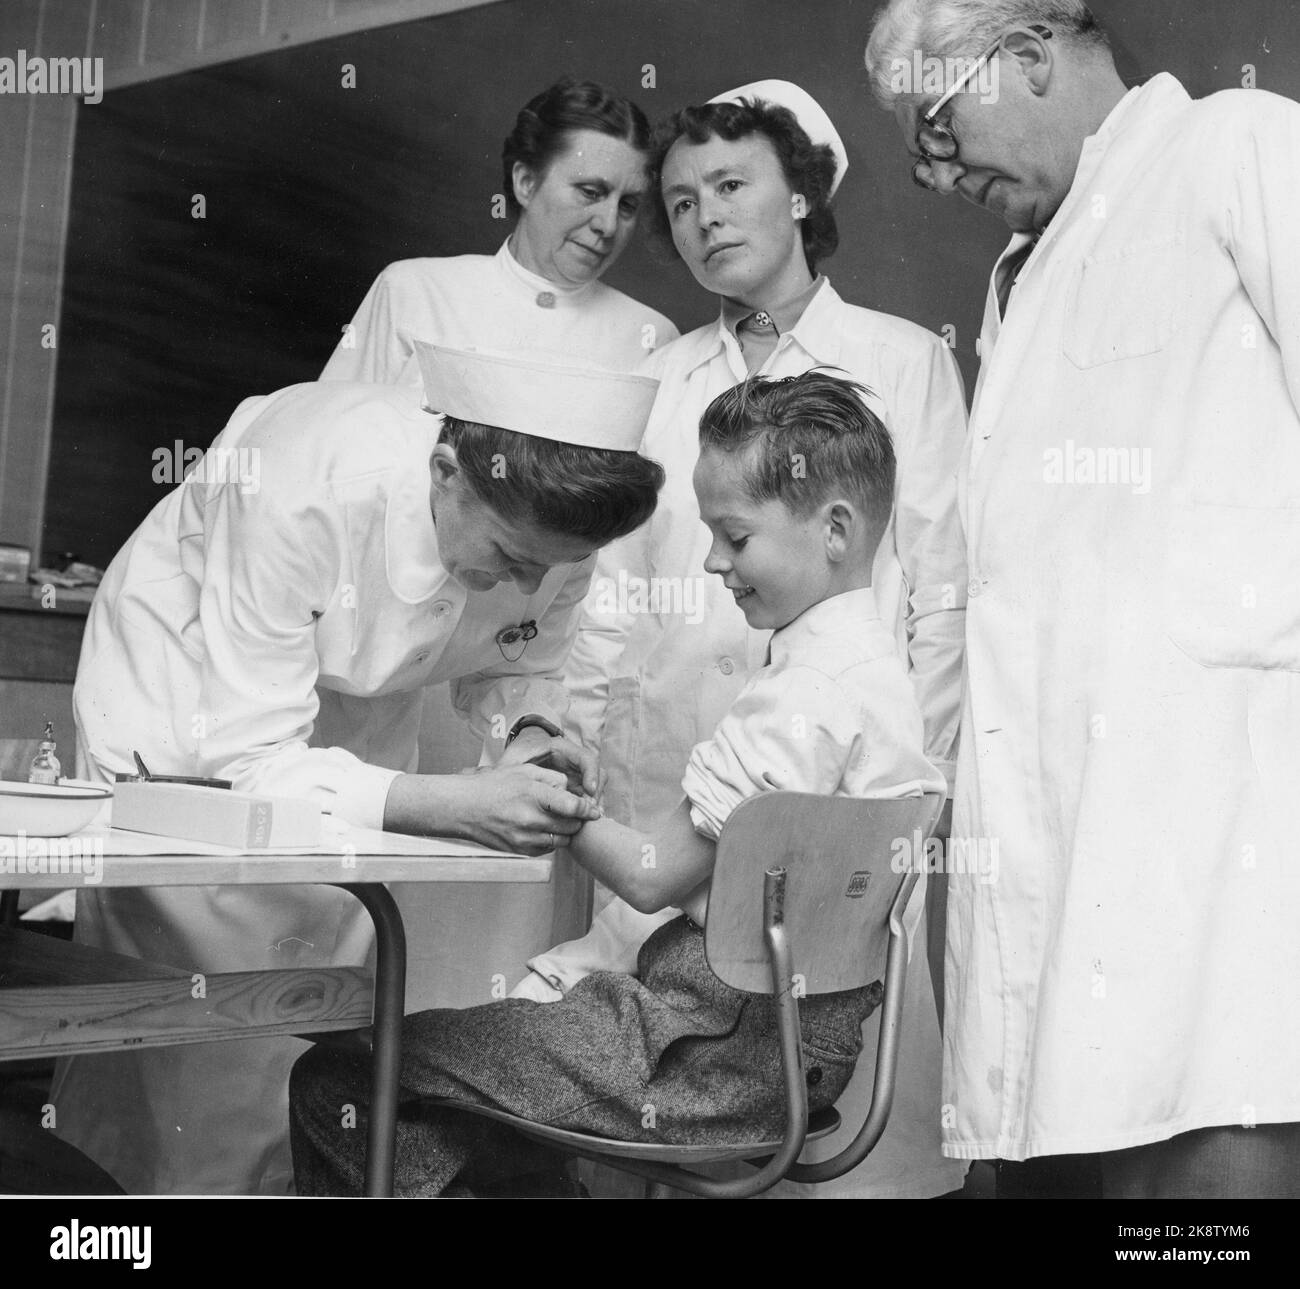 Nes at Romerike, 19561016: The first vaccination against poliomylitis started at Framtun school at Nes at Romerike. Health sister Ruth Hauge vaccinates the first student Ola Eide. District physician Øverland and the nurses Borghild Henden and Signe Berg follow. Photo: Aage Storløkken / Current / NTB Stock Photo